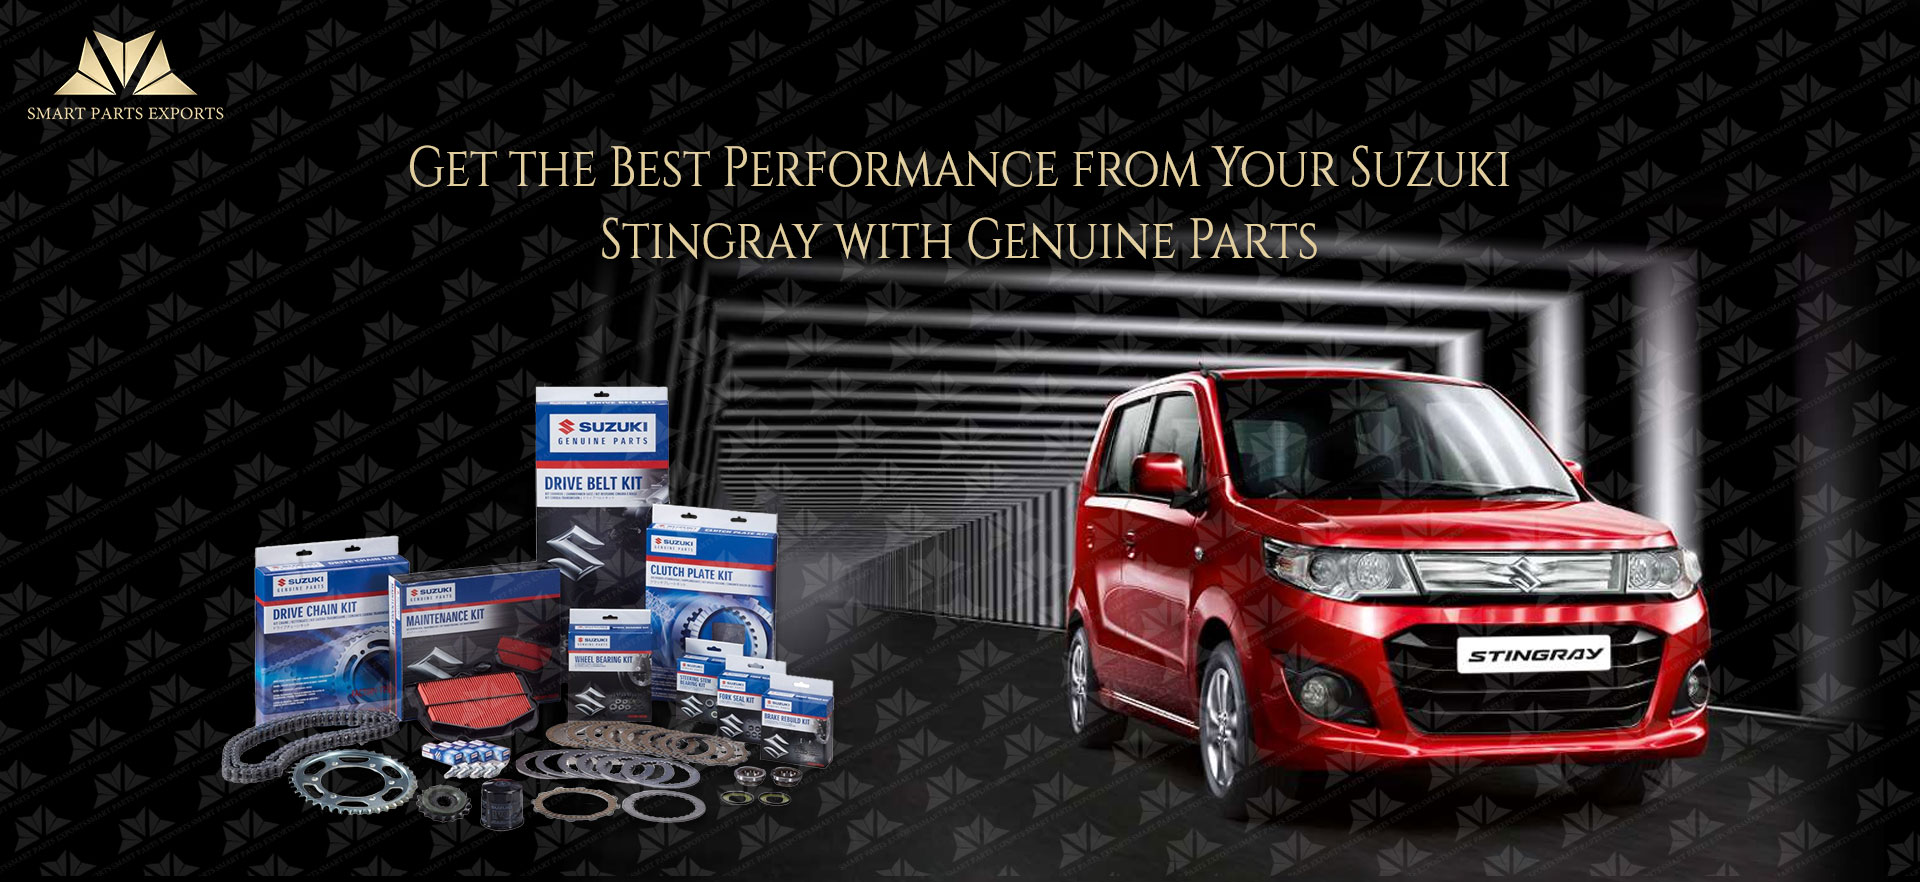 Get the Best Performance from Your Suzuki Stingray with Genuine Parts